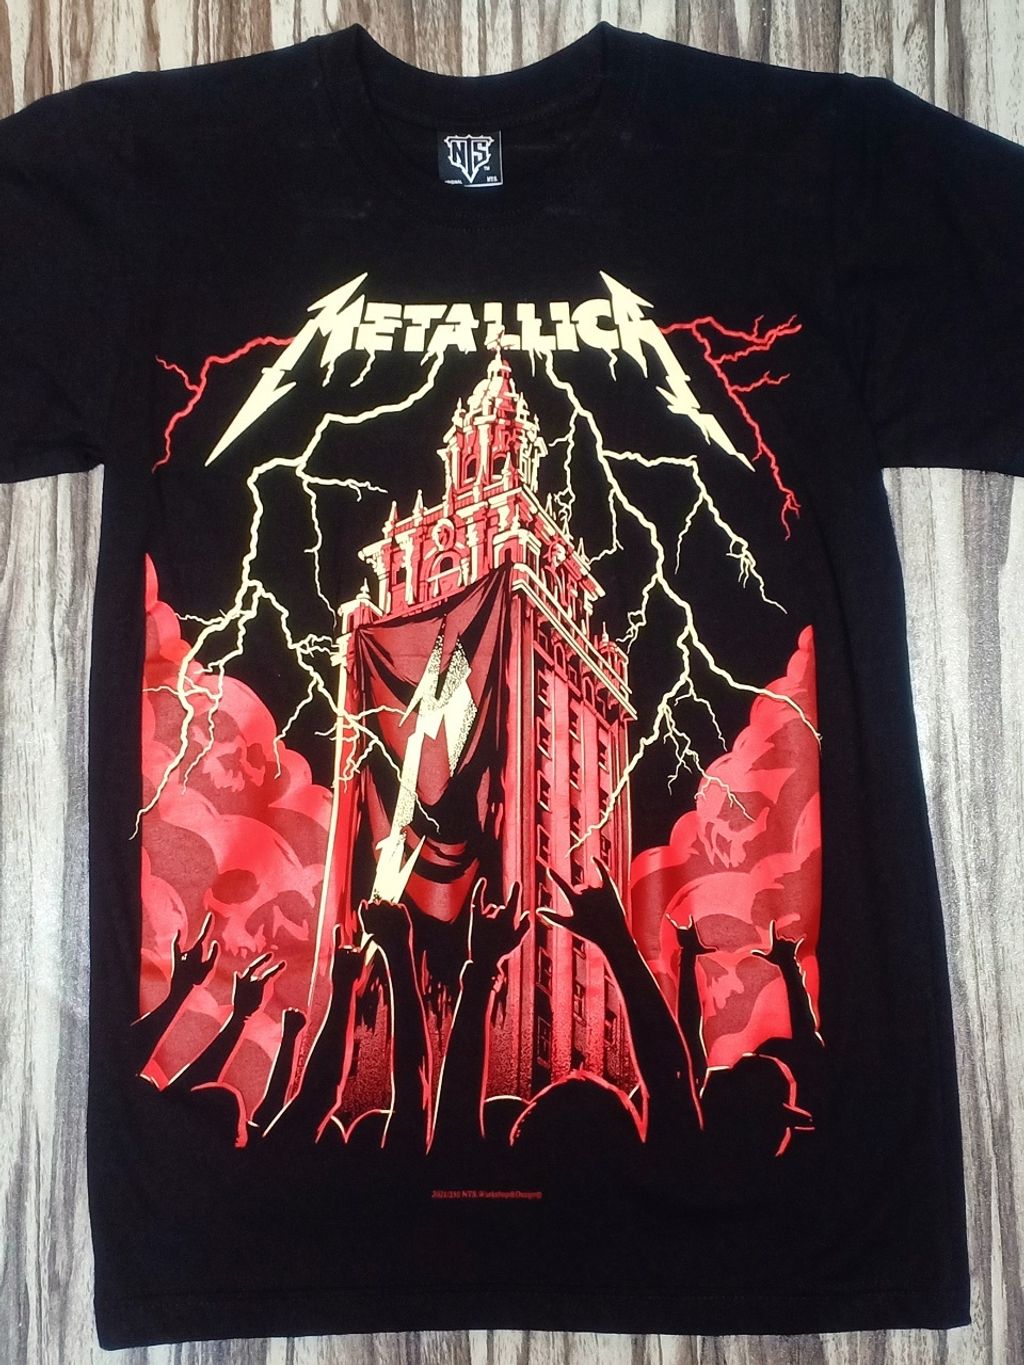 Encyclopaedia Metallum: The Metal Archives  Featuring custom t-shirts,  prints, and more